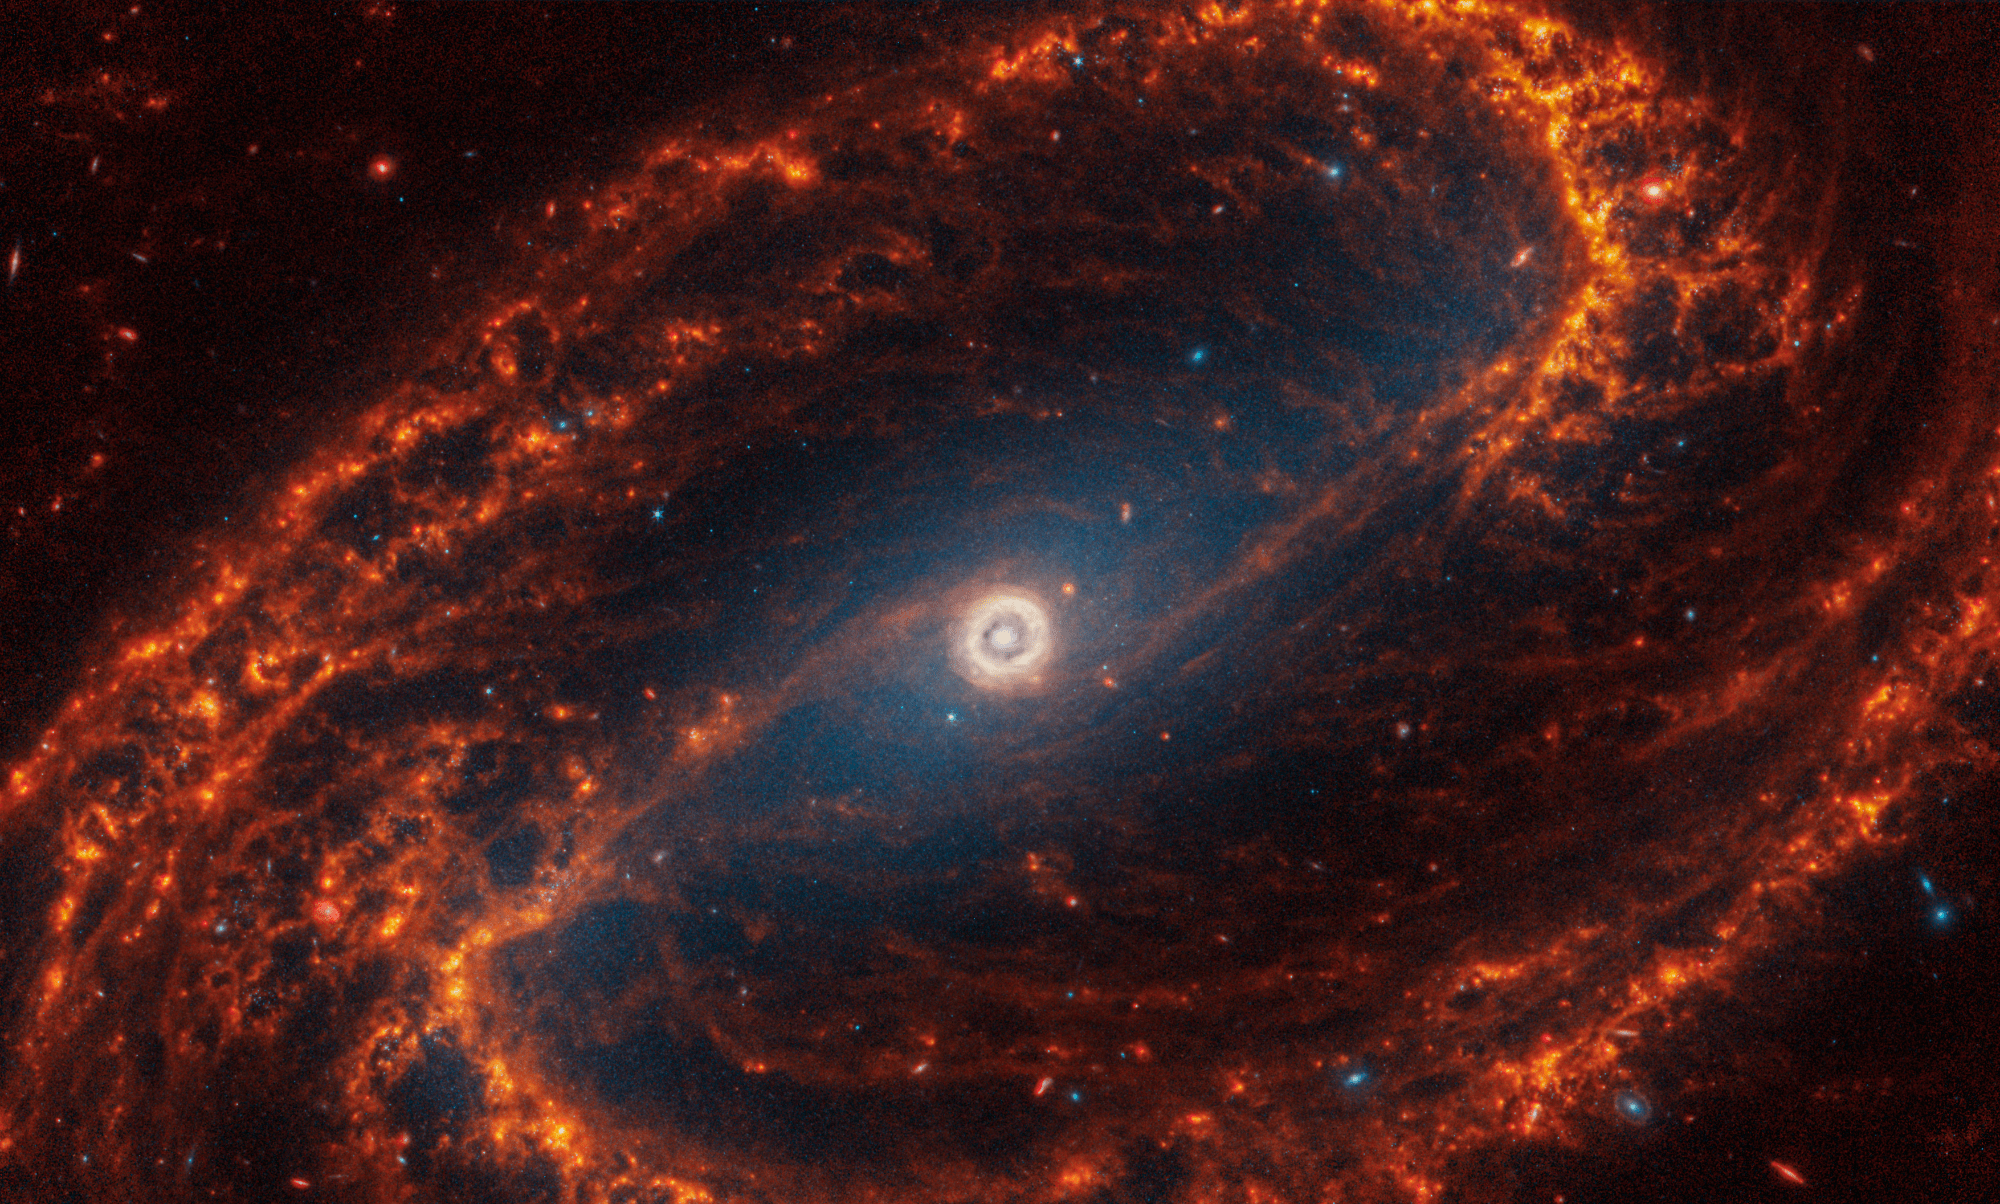 Webb’s image of NGC 1300 shows a face-on barred spiral galaxy anchored by its central region, which is circular and shows a bright white point at the center with a light yellow circle around it. The central core is tiny compared to the rest of the galaxy. The core extends into the galaxy’s prominent diagonal bar structure, which is filled with a blue haze of stars. Orange dust filaments cross the bar, extending diagonally to the top and bottom, connecting the yellow circle in the central core to the galaxy’s spiral arms. There are two distinct orange spiral arms made of stars, gas, and dust that start at the edges of the bar and rotate counterclockwise. Together, the arm and bars form a backward S shape. The spiral arms are largely orange, ranging from dark to bright orange. Scattered across the packed scene are very few bright blue pinpoints of light. There are vast areas between where the orange spiral arms wrap that appear black. The top left and bottom right edges are dark black and there are some larger red and blue points of light, some that appear like disks seen from the side.